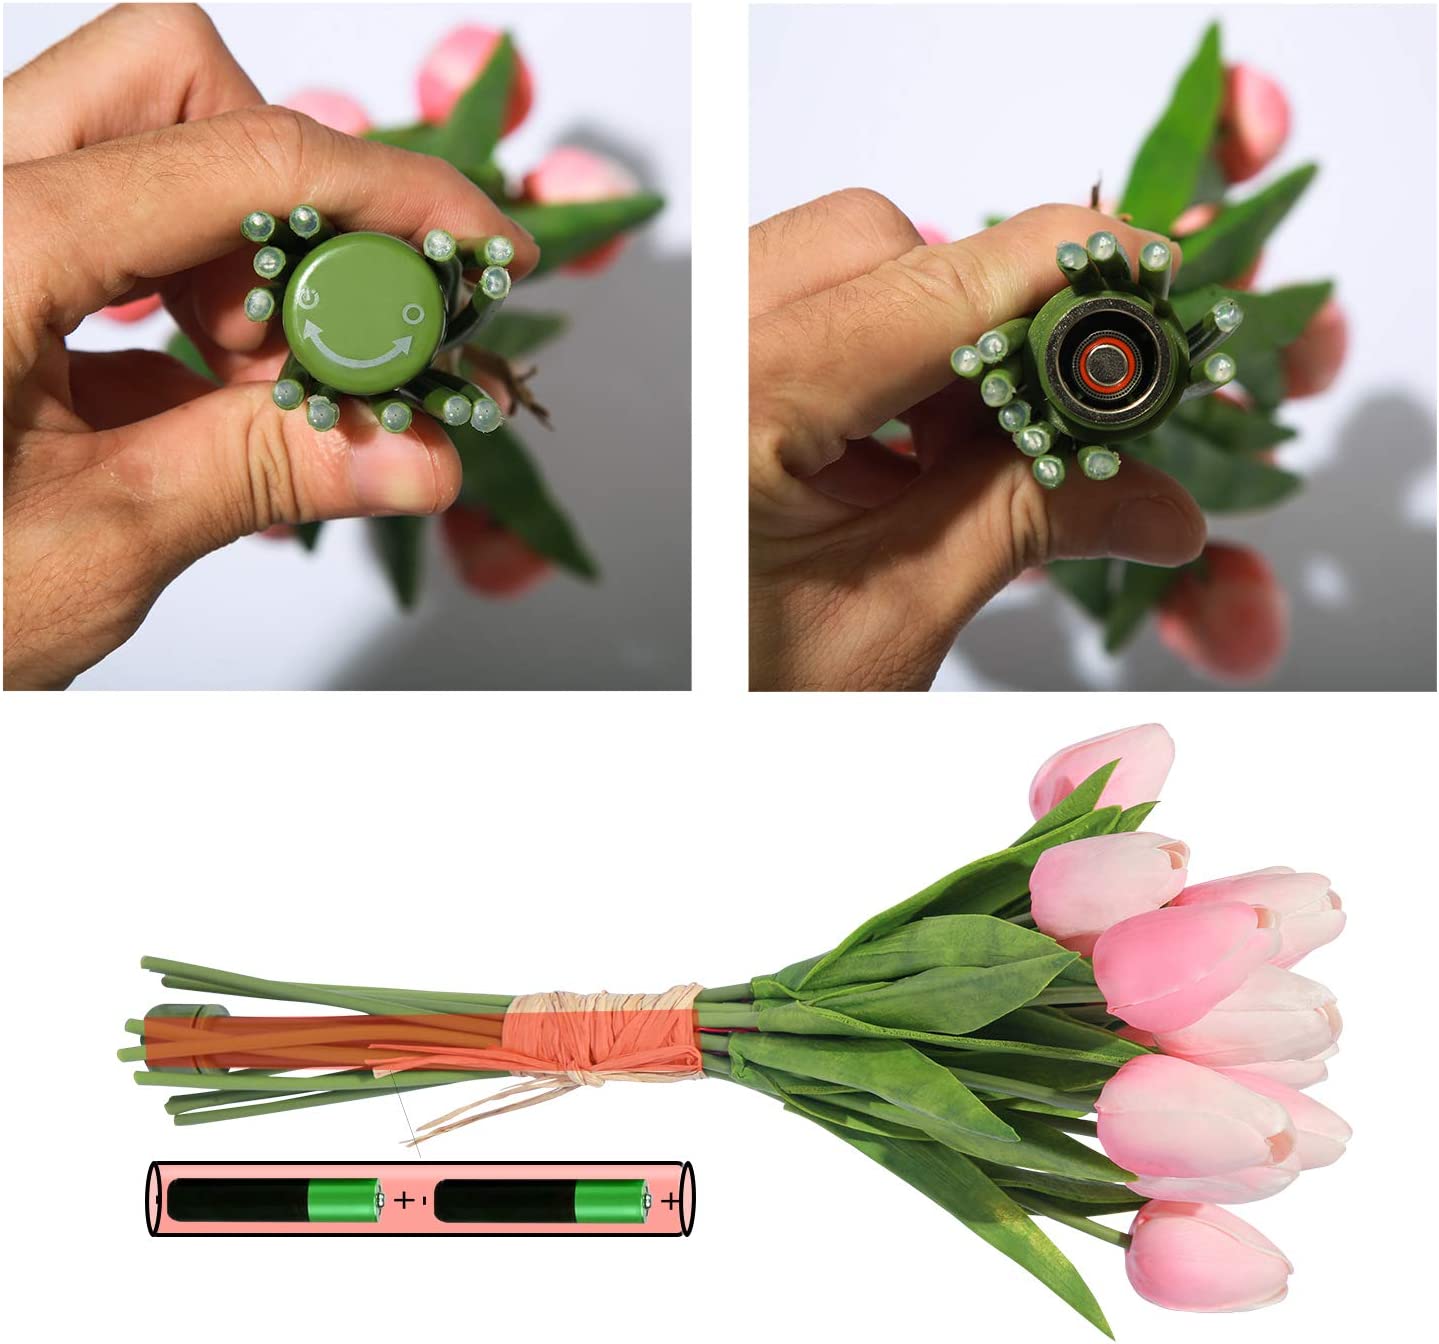 LED-Desk-Lights-Artificial-Flowers-12-pcs-Tulips-with-LED-Light-Real-Touch-Fake-Bouquet-for-Home-Decor-Table-Night-Lamp-Gift-for-Valentine-s-Day-Mother-s-Day-Holiday-43